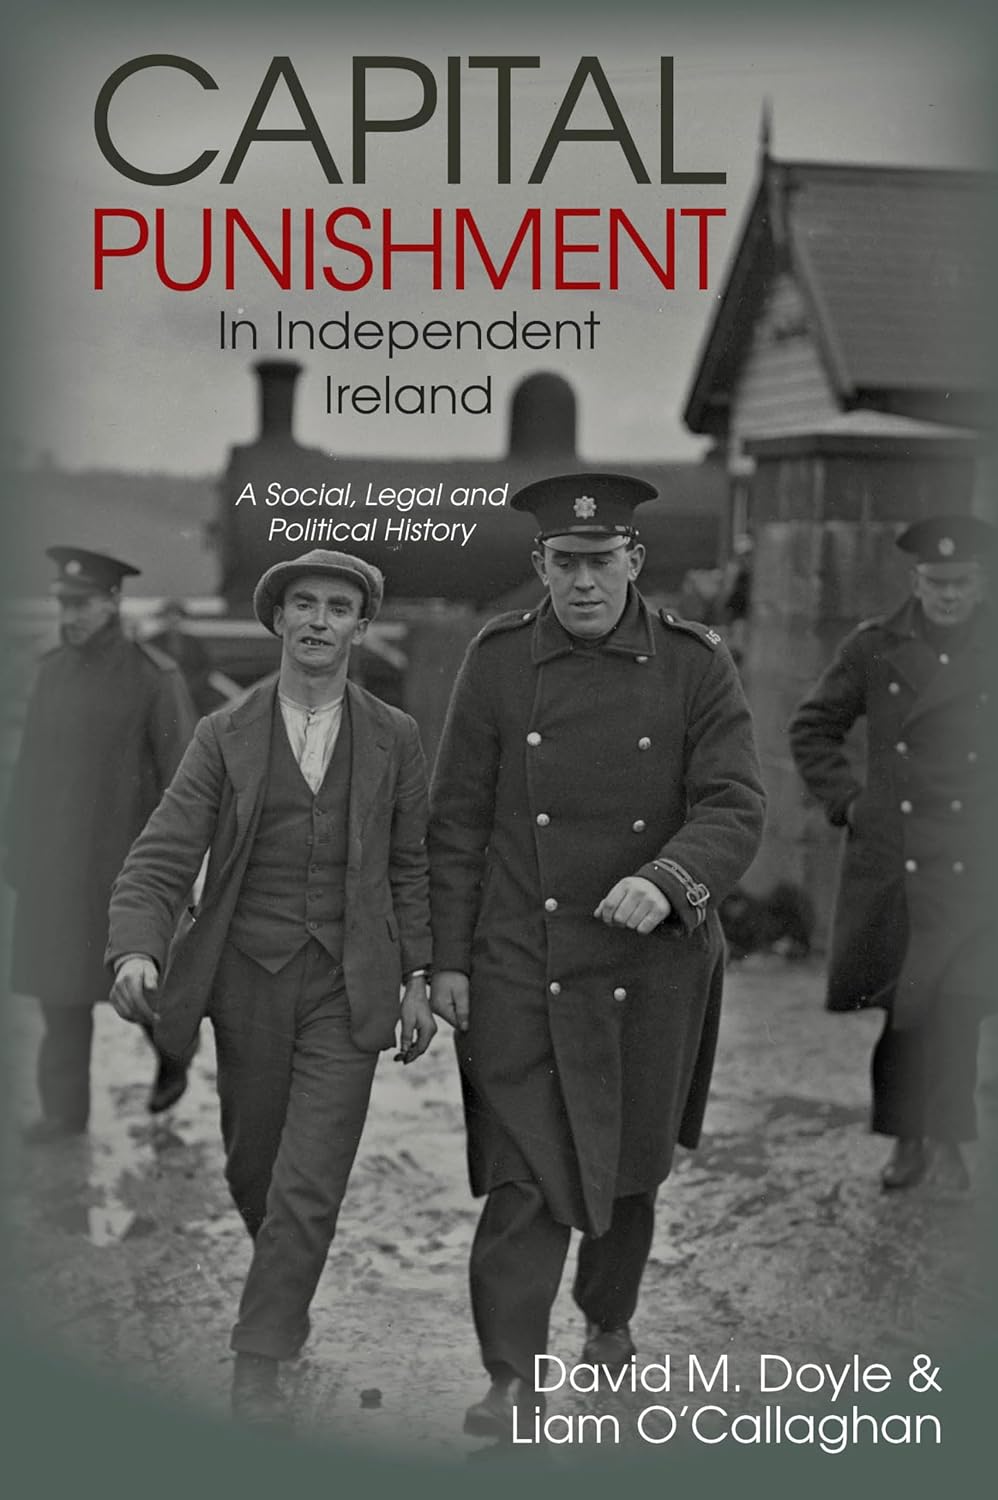 Capital Punishment in Independent Ireland: A Social, Legal and Political History, by David M. Doyle & Liam O’Callaghan